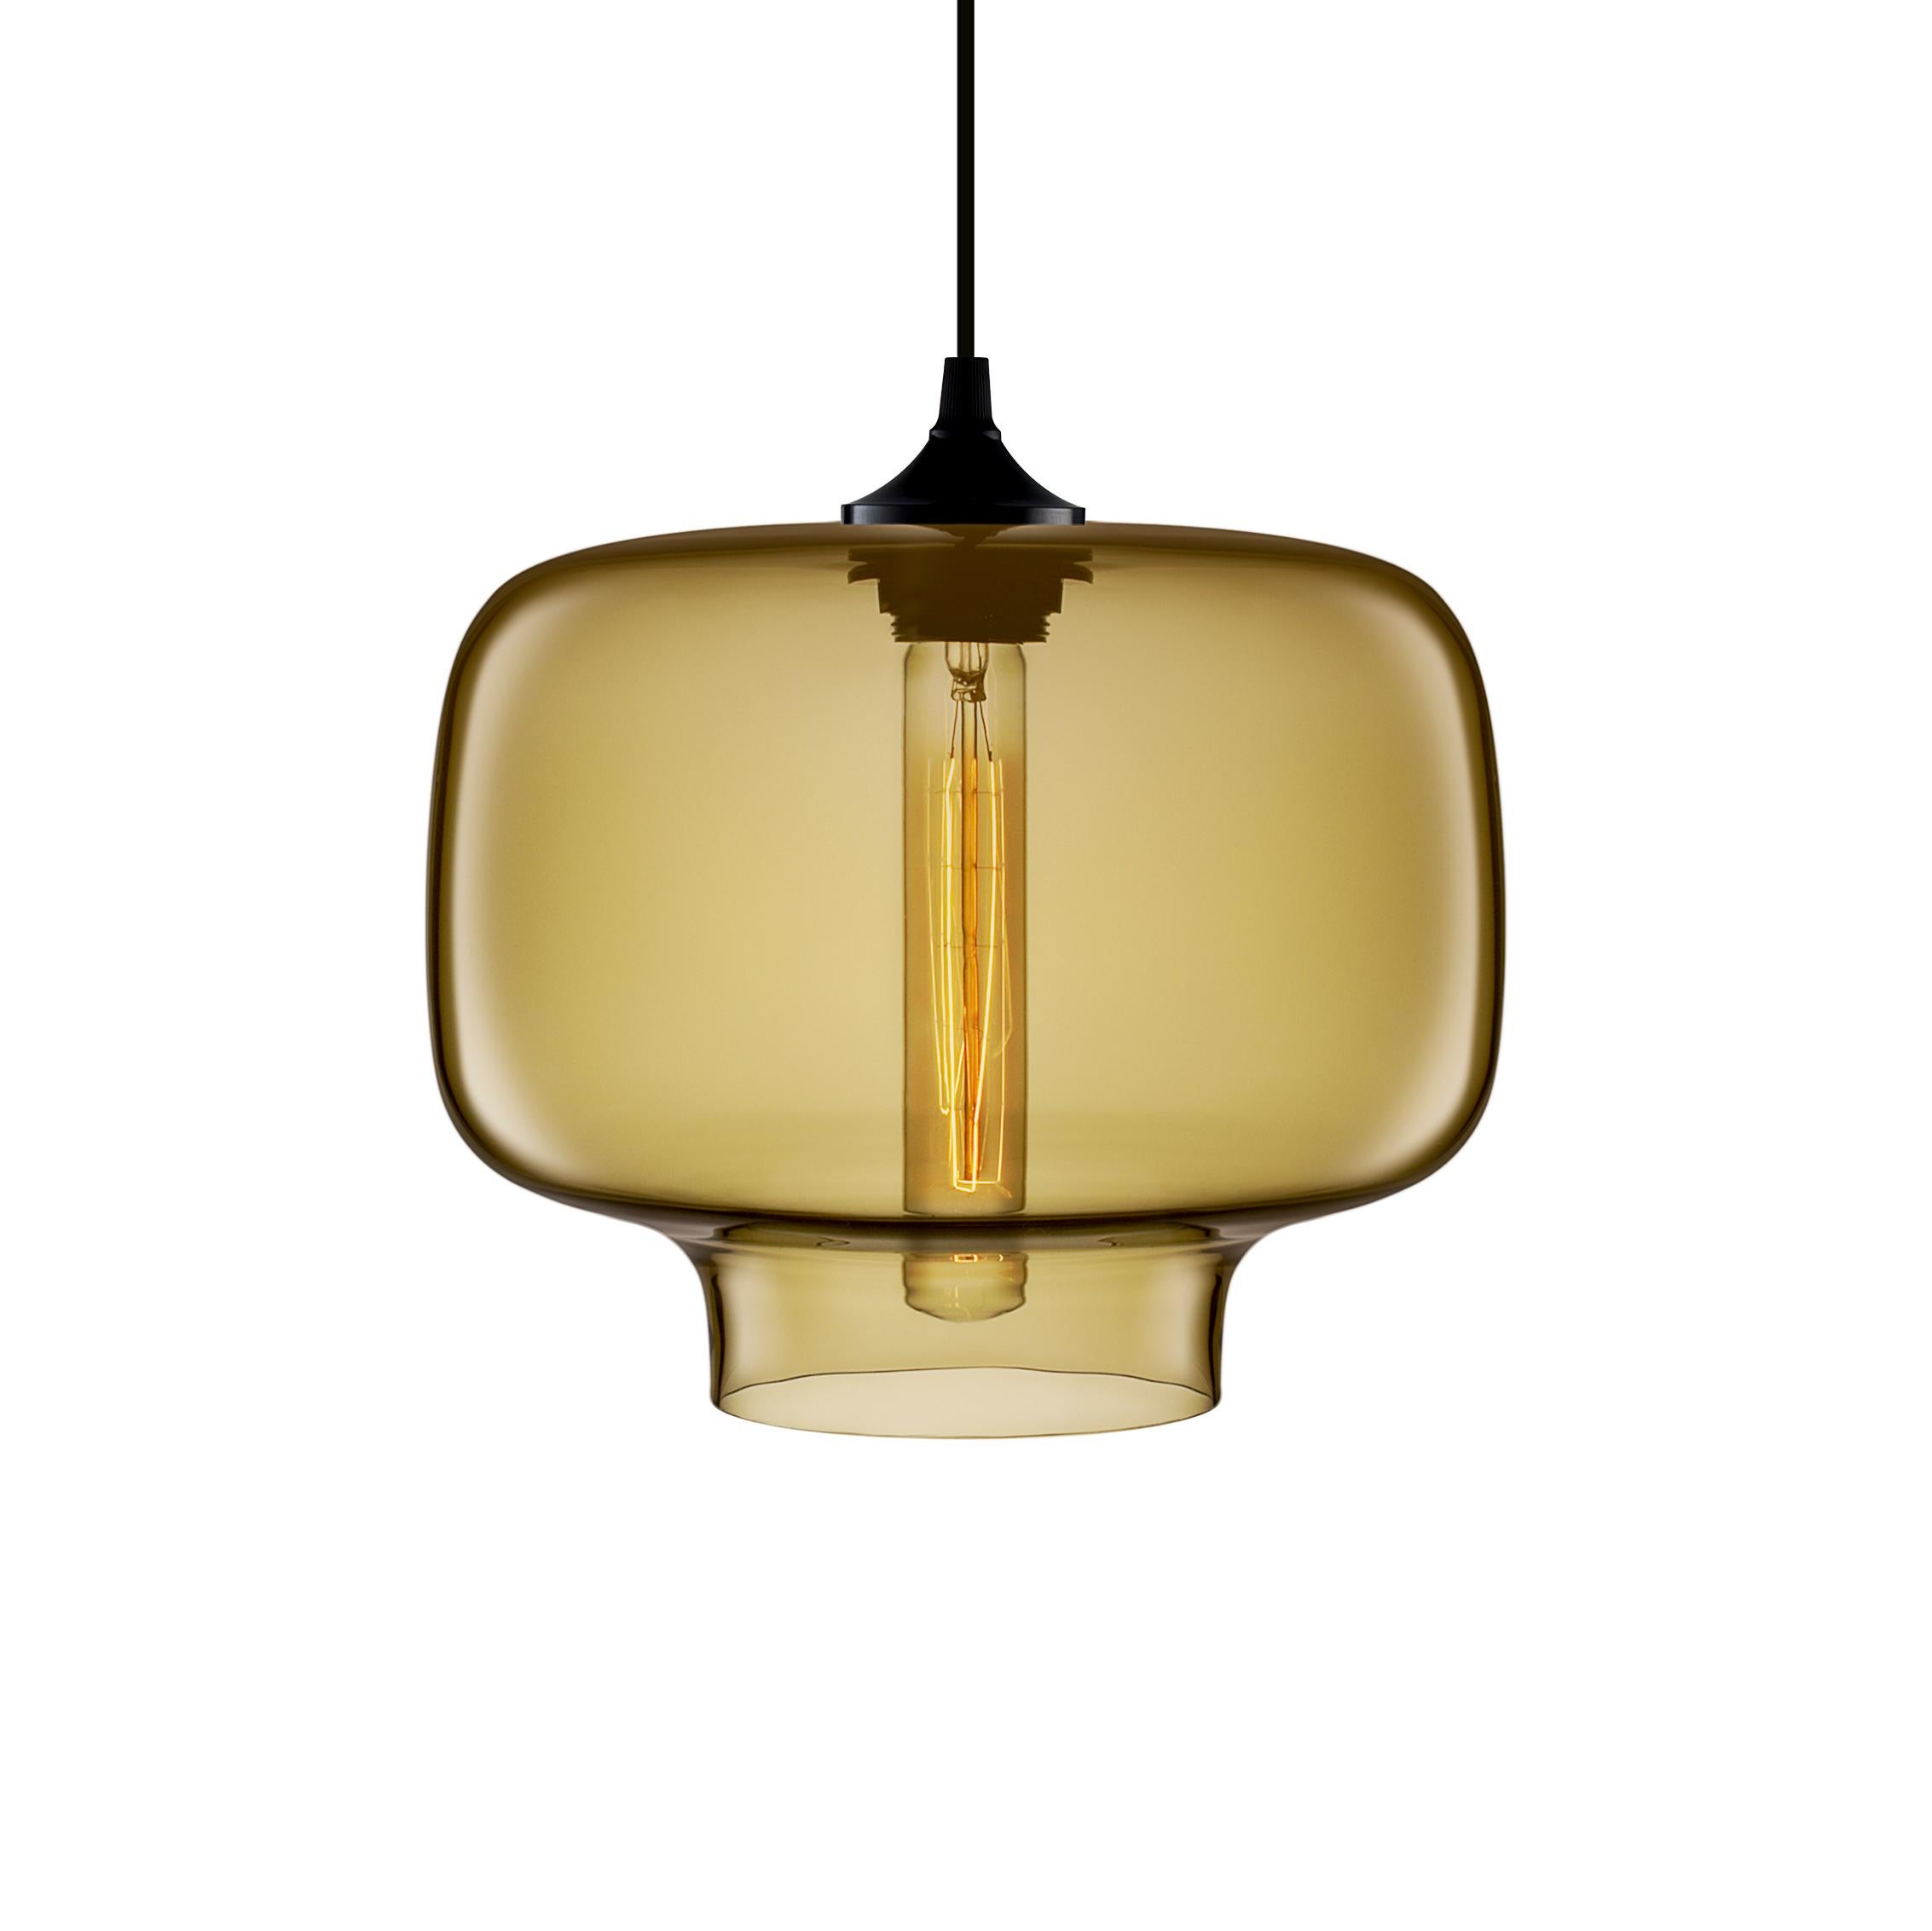 Oculo Plum Handblown Modern Glass Pendant Light, Made in the USA In New Condition For Sale In Beacon, NY